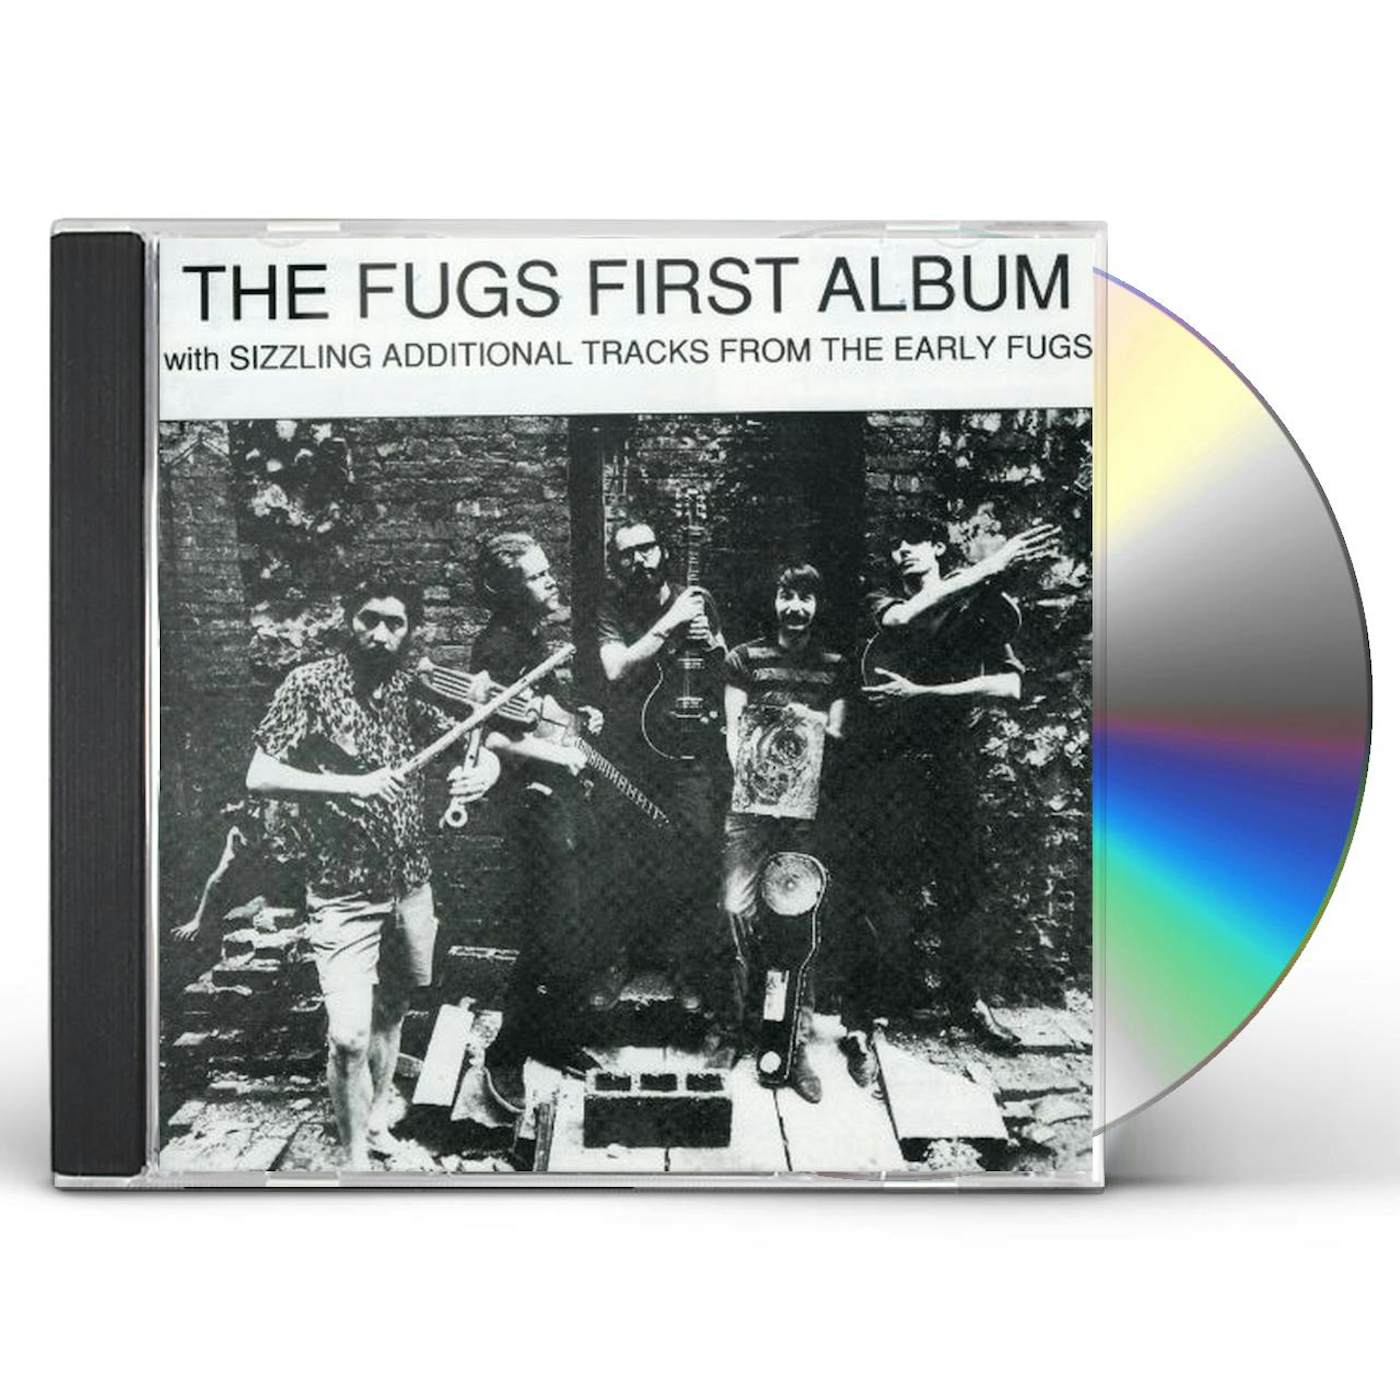 The Fugs FIRST ALBUM CD